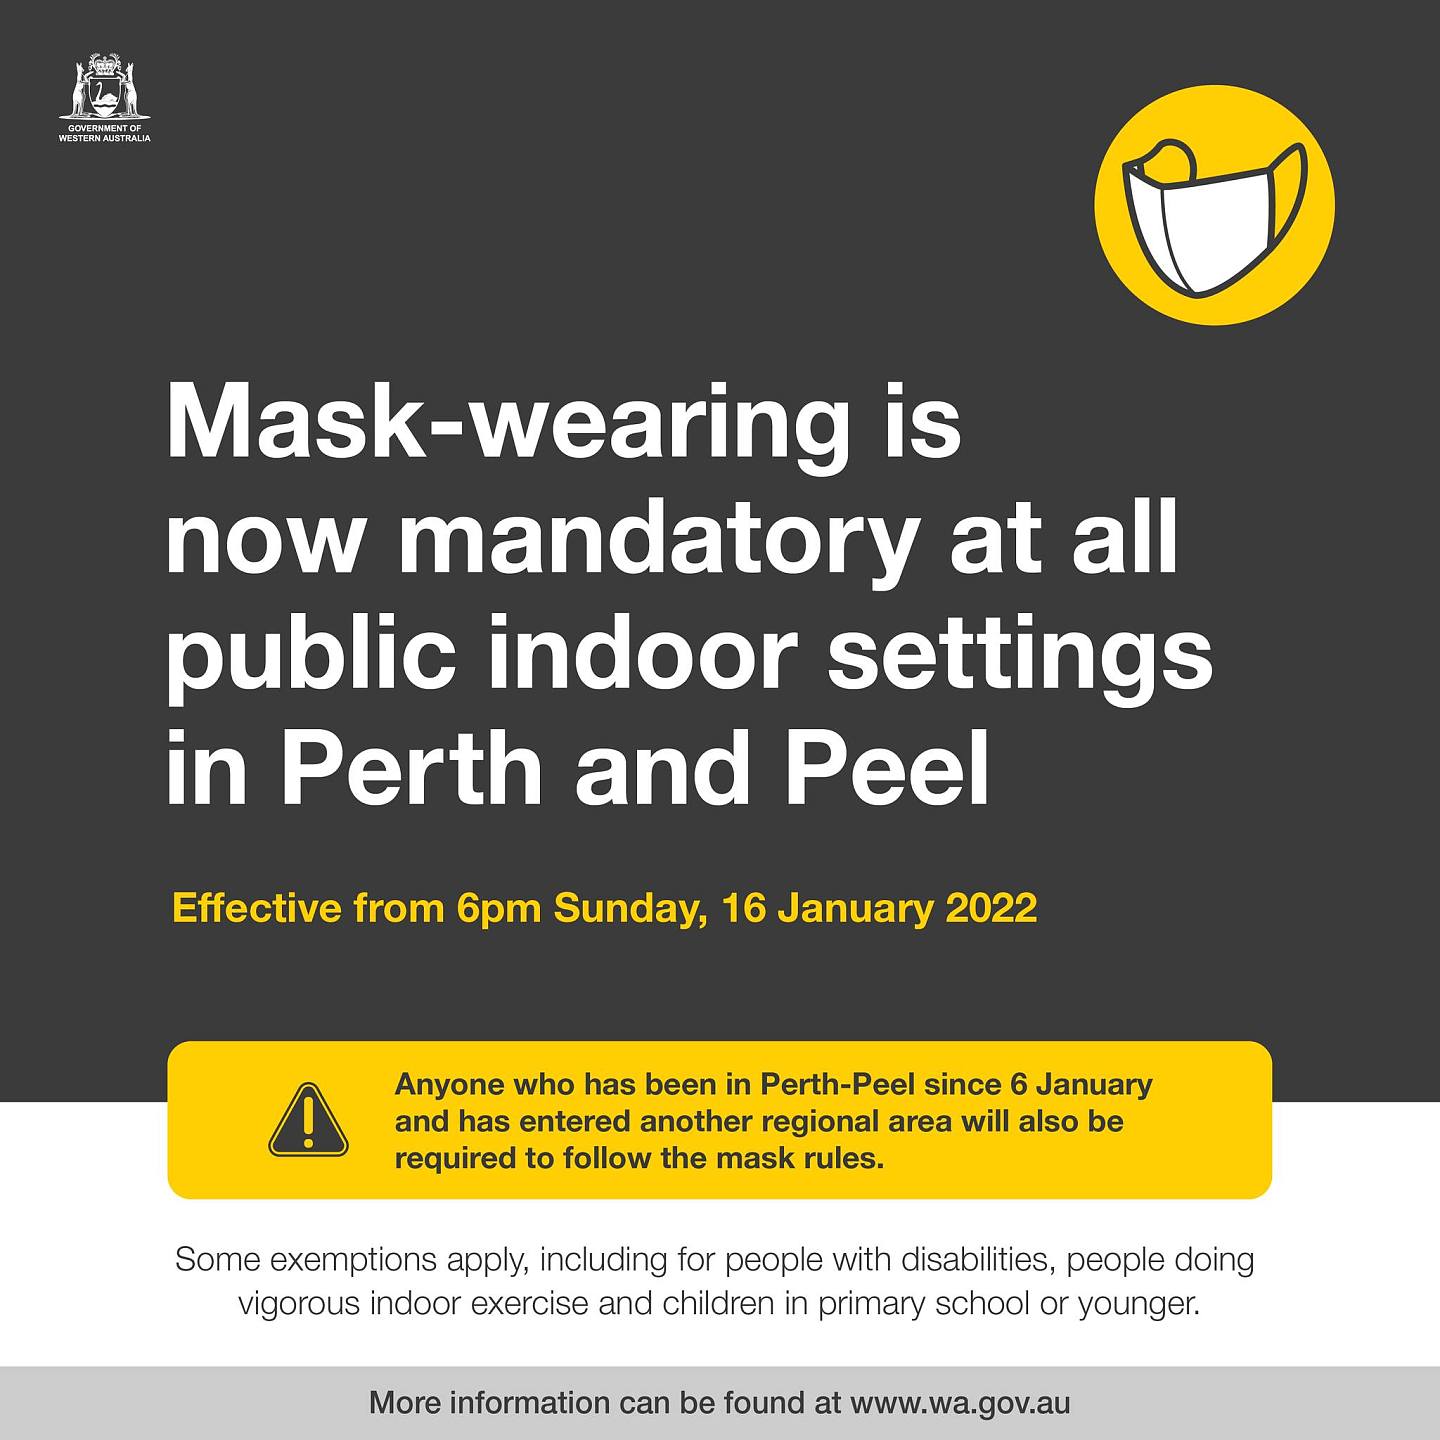 May be an image of text that says 'Mask-wearing is now mandatory at all public indoor settings in Perth and Peel Effective from 6pm Sunday, 16 January 2022 Anyone who has been Perth-Peel since January and has entered another regional area will also be required to follow the mask rules. Some exemptions apply, including for people with disabilities, people doing vigorous indoor exercise and children in primary school or younger. More information can be found at www.wa.gov.au'